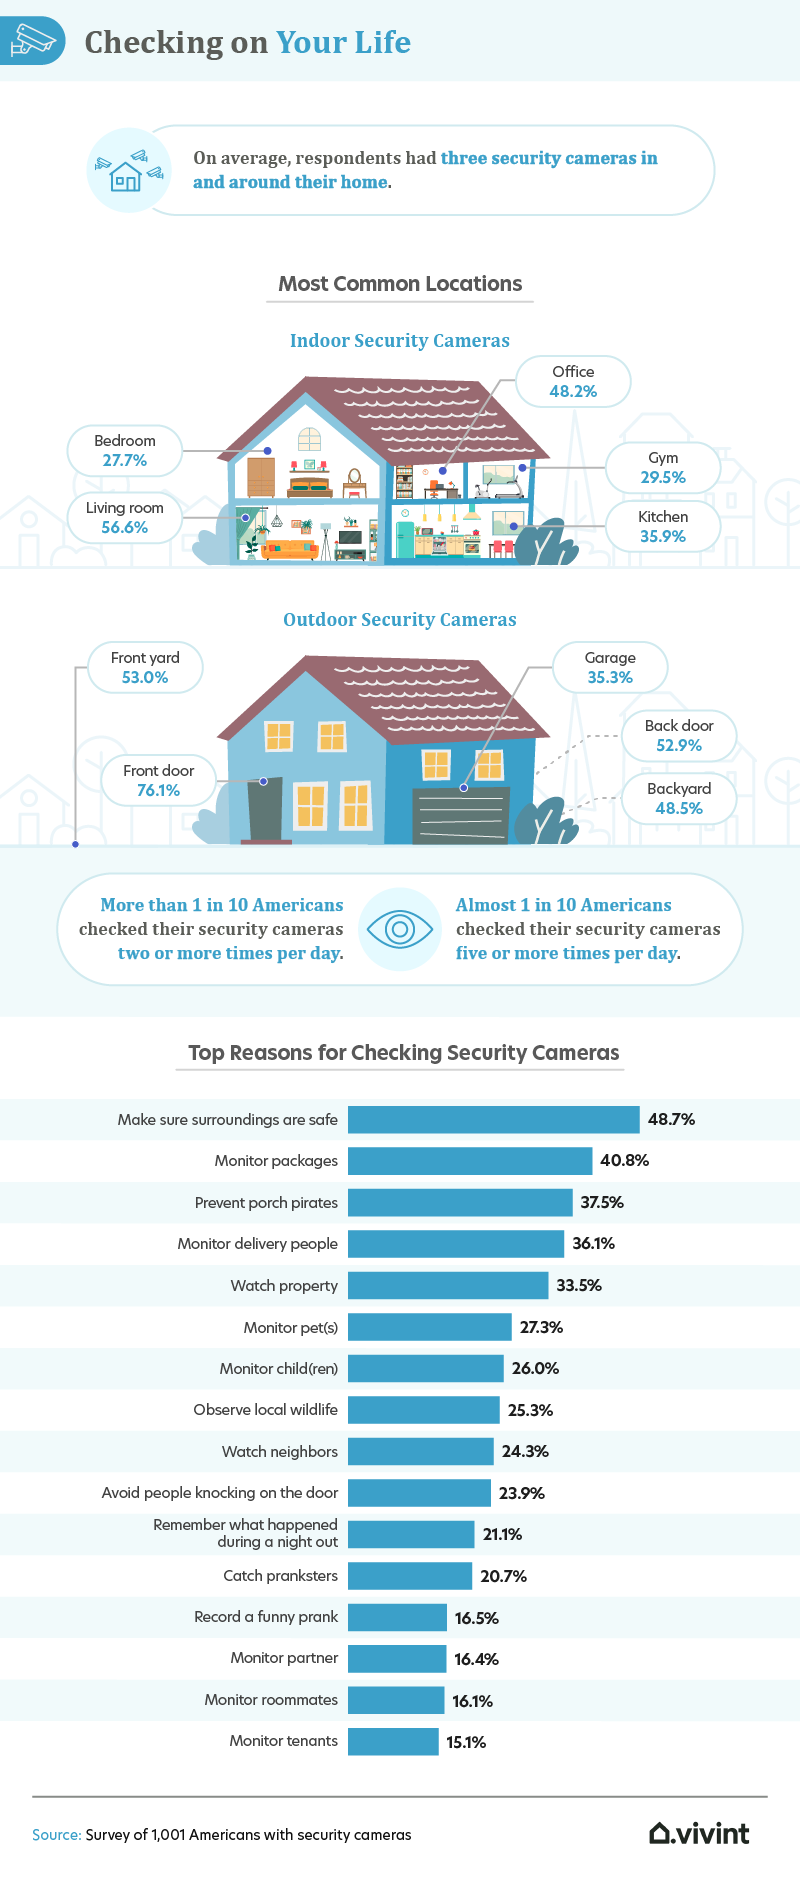 A summary of most common locations for home security cameras.